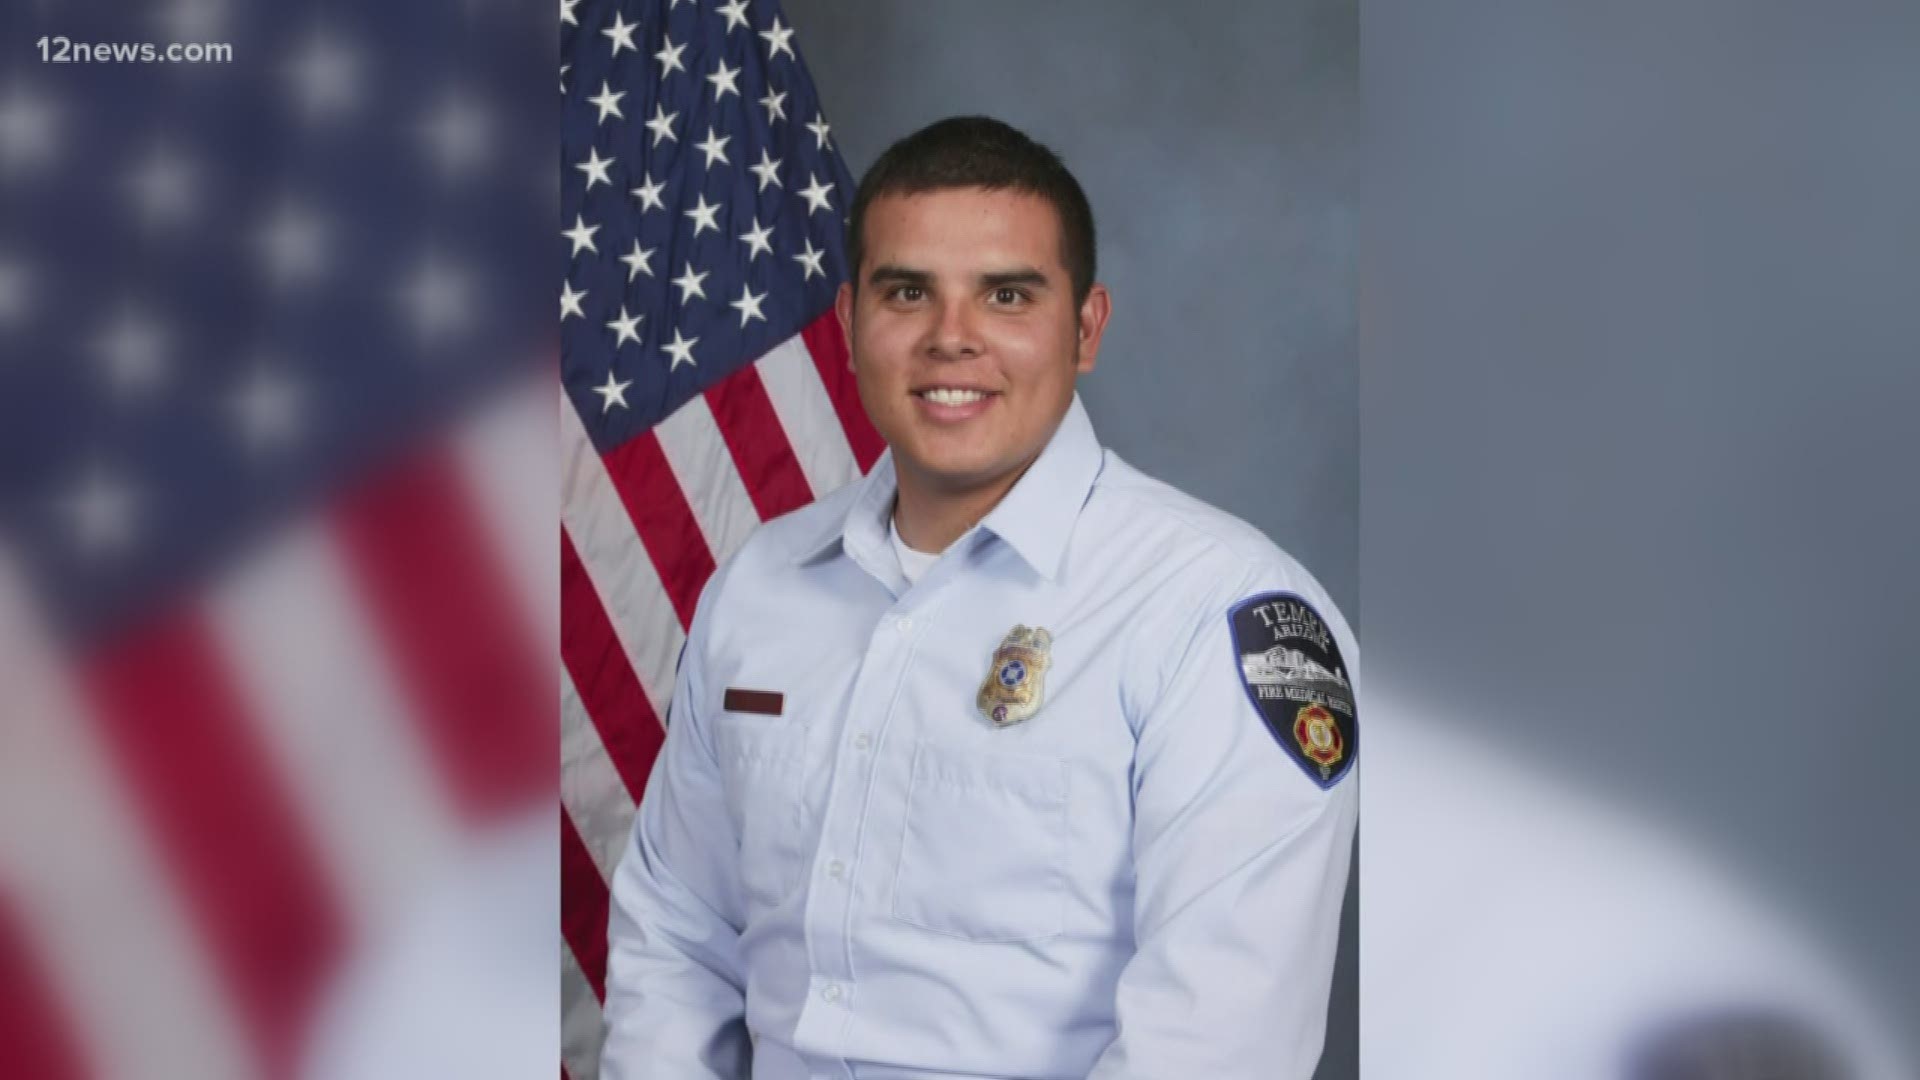 Tommy Arriaga died following his battle with colorectal cancer. His cancer has been determined to be related to his work, the fire department said.